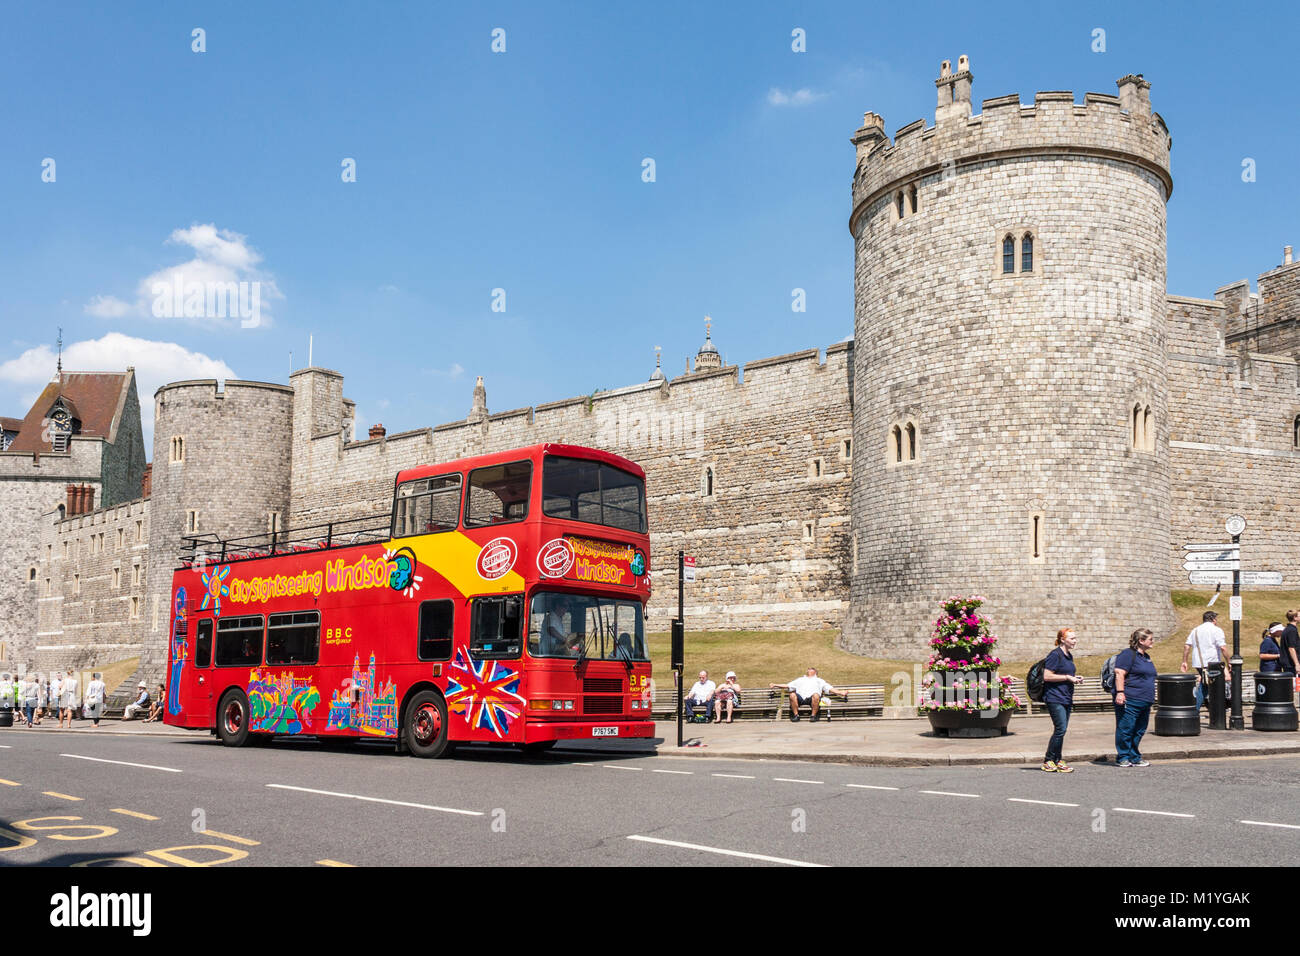 City Sightseeing open-top, double-decker sightseeing tour bus outside Windsor Castle, Windsor, Berkshire, England, GB, UK Stock Photo